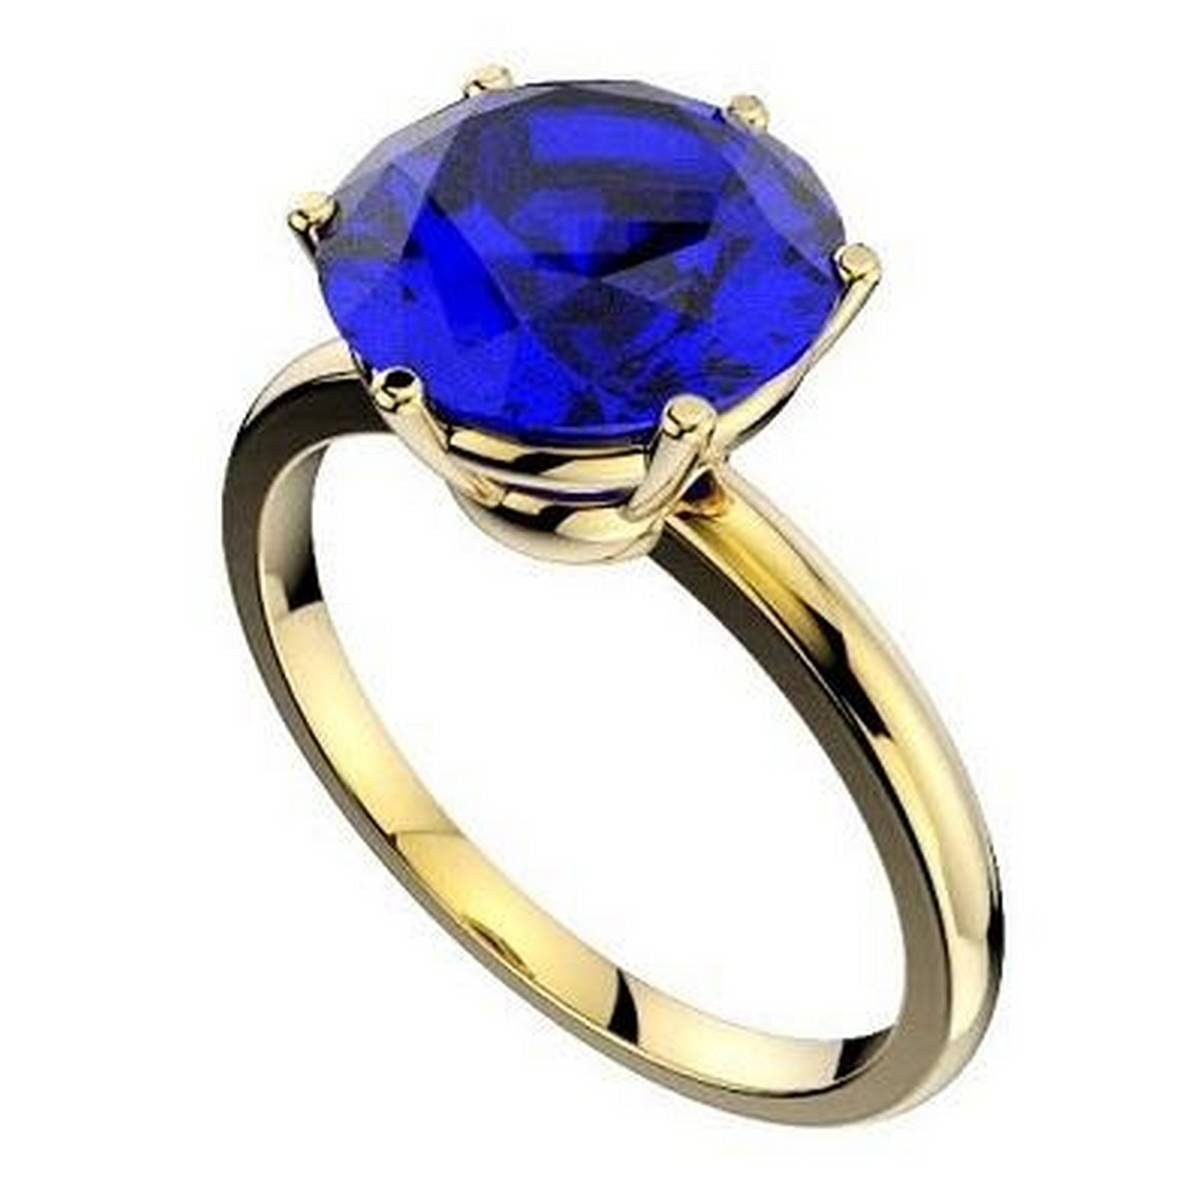 5-pack Rings - Gold-colored/blue - Ladies